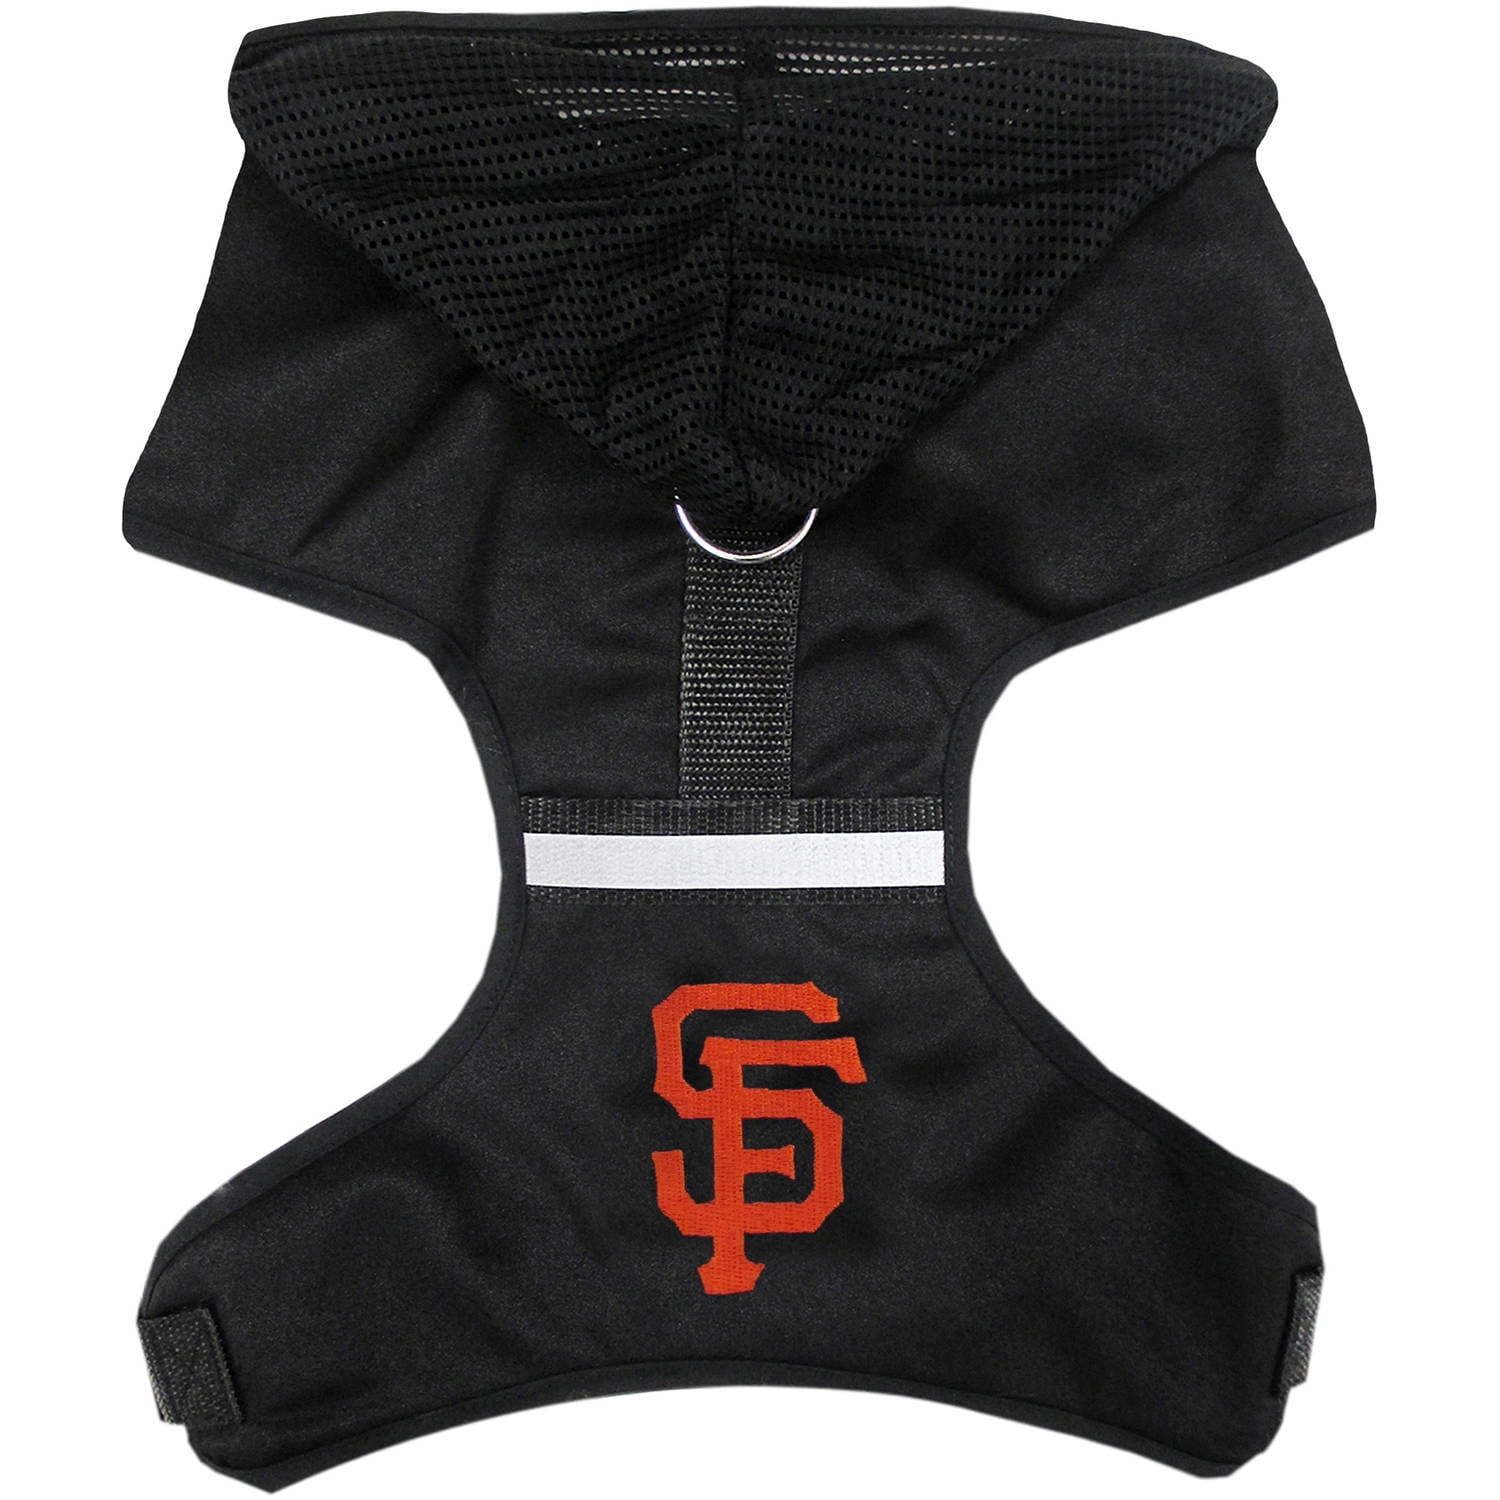 Pets First MLB San Francisco Giants Pet Harness with Hood, Small